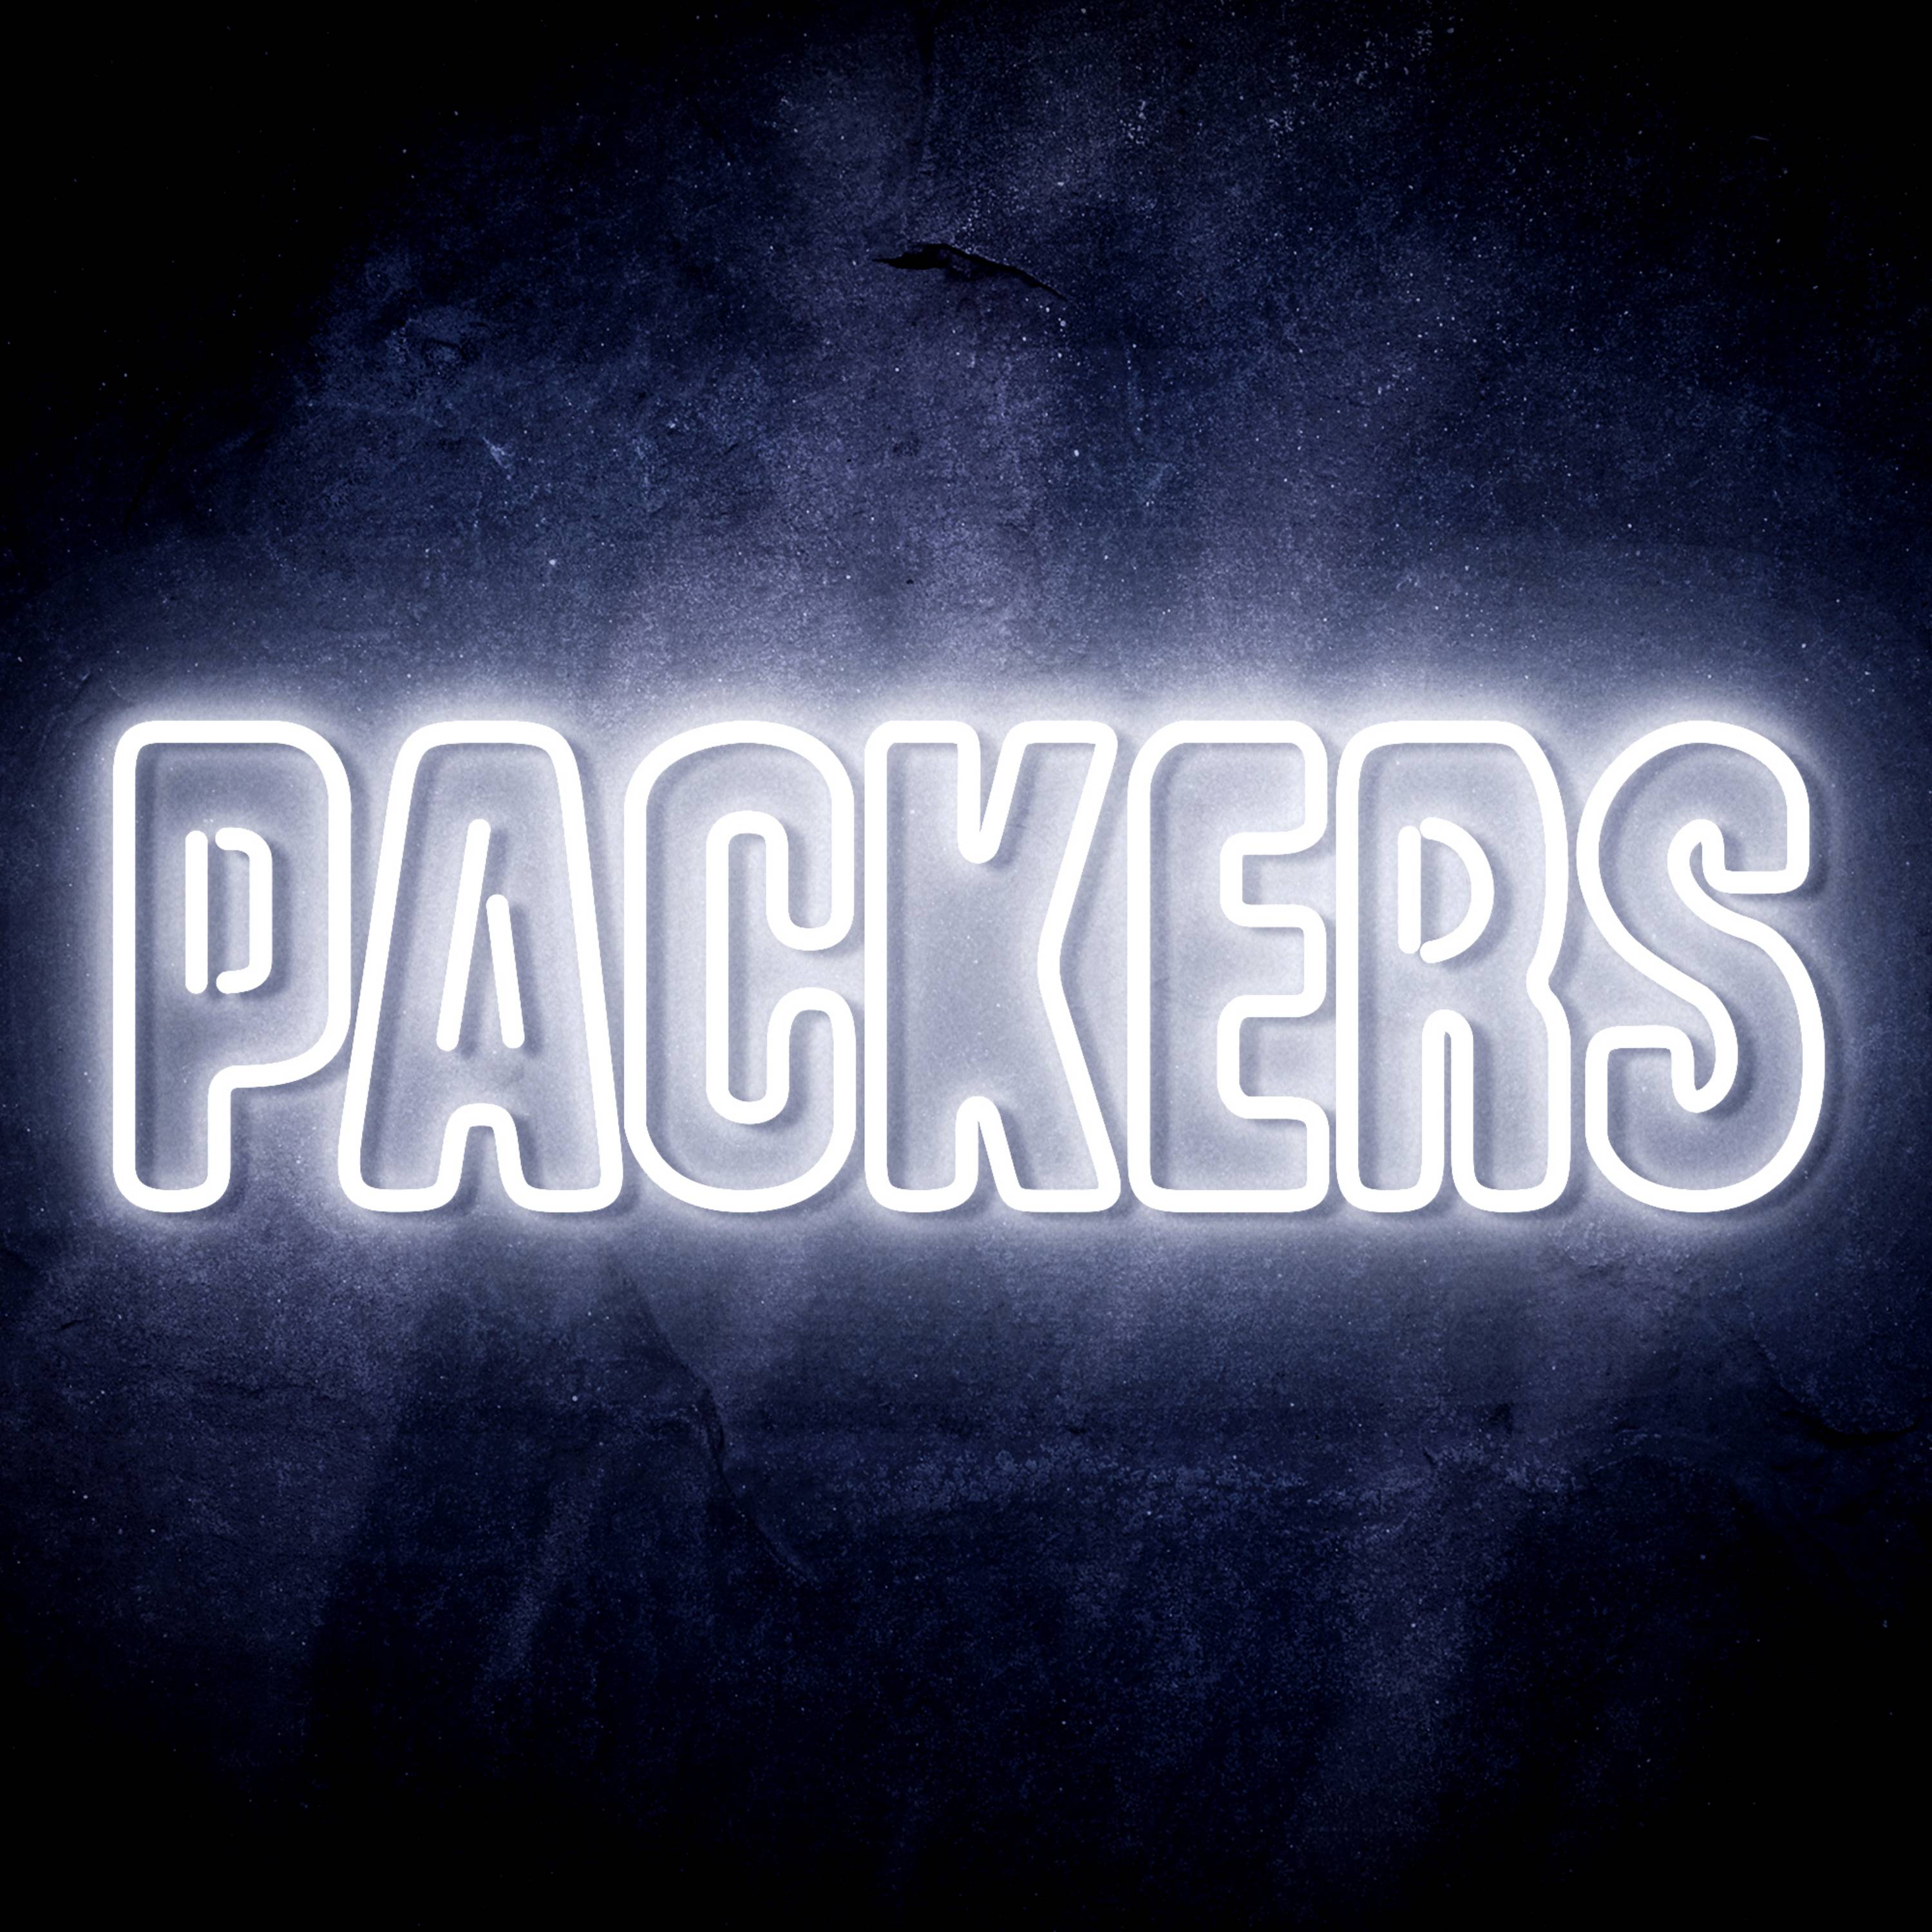 NFL PACKERS LED Neon Sign